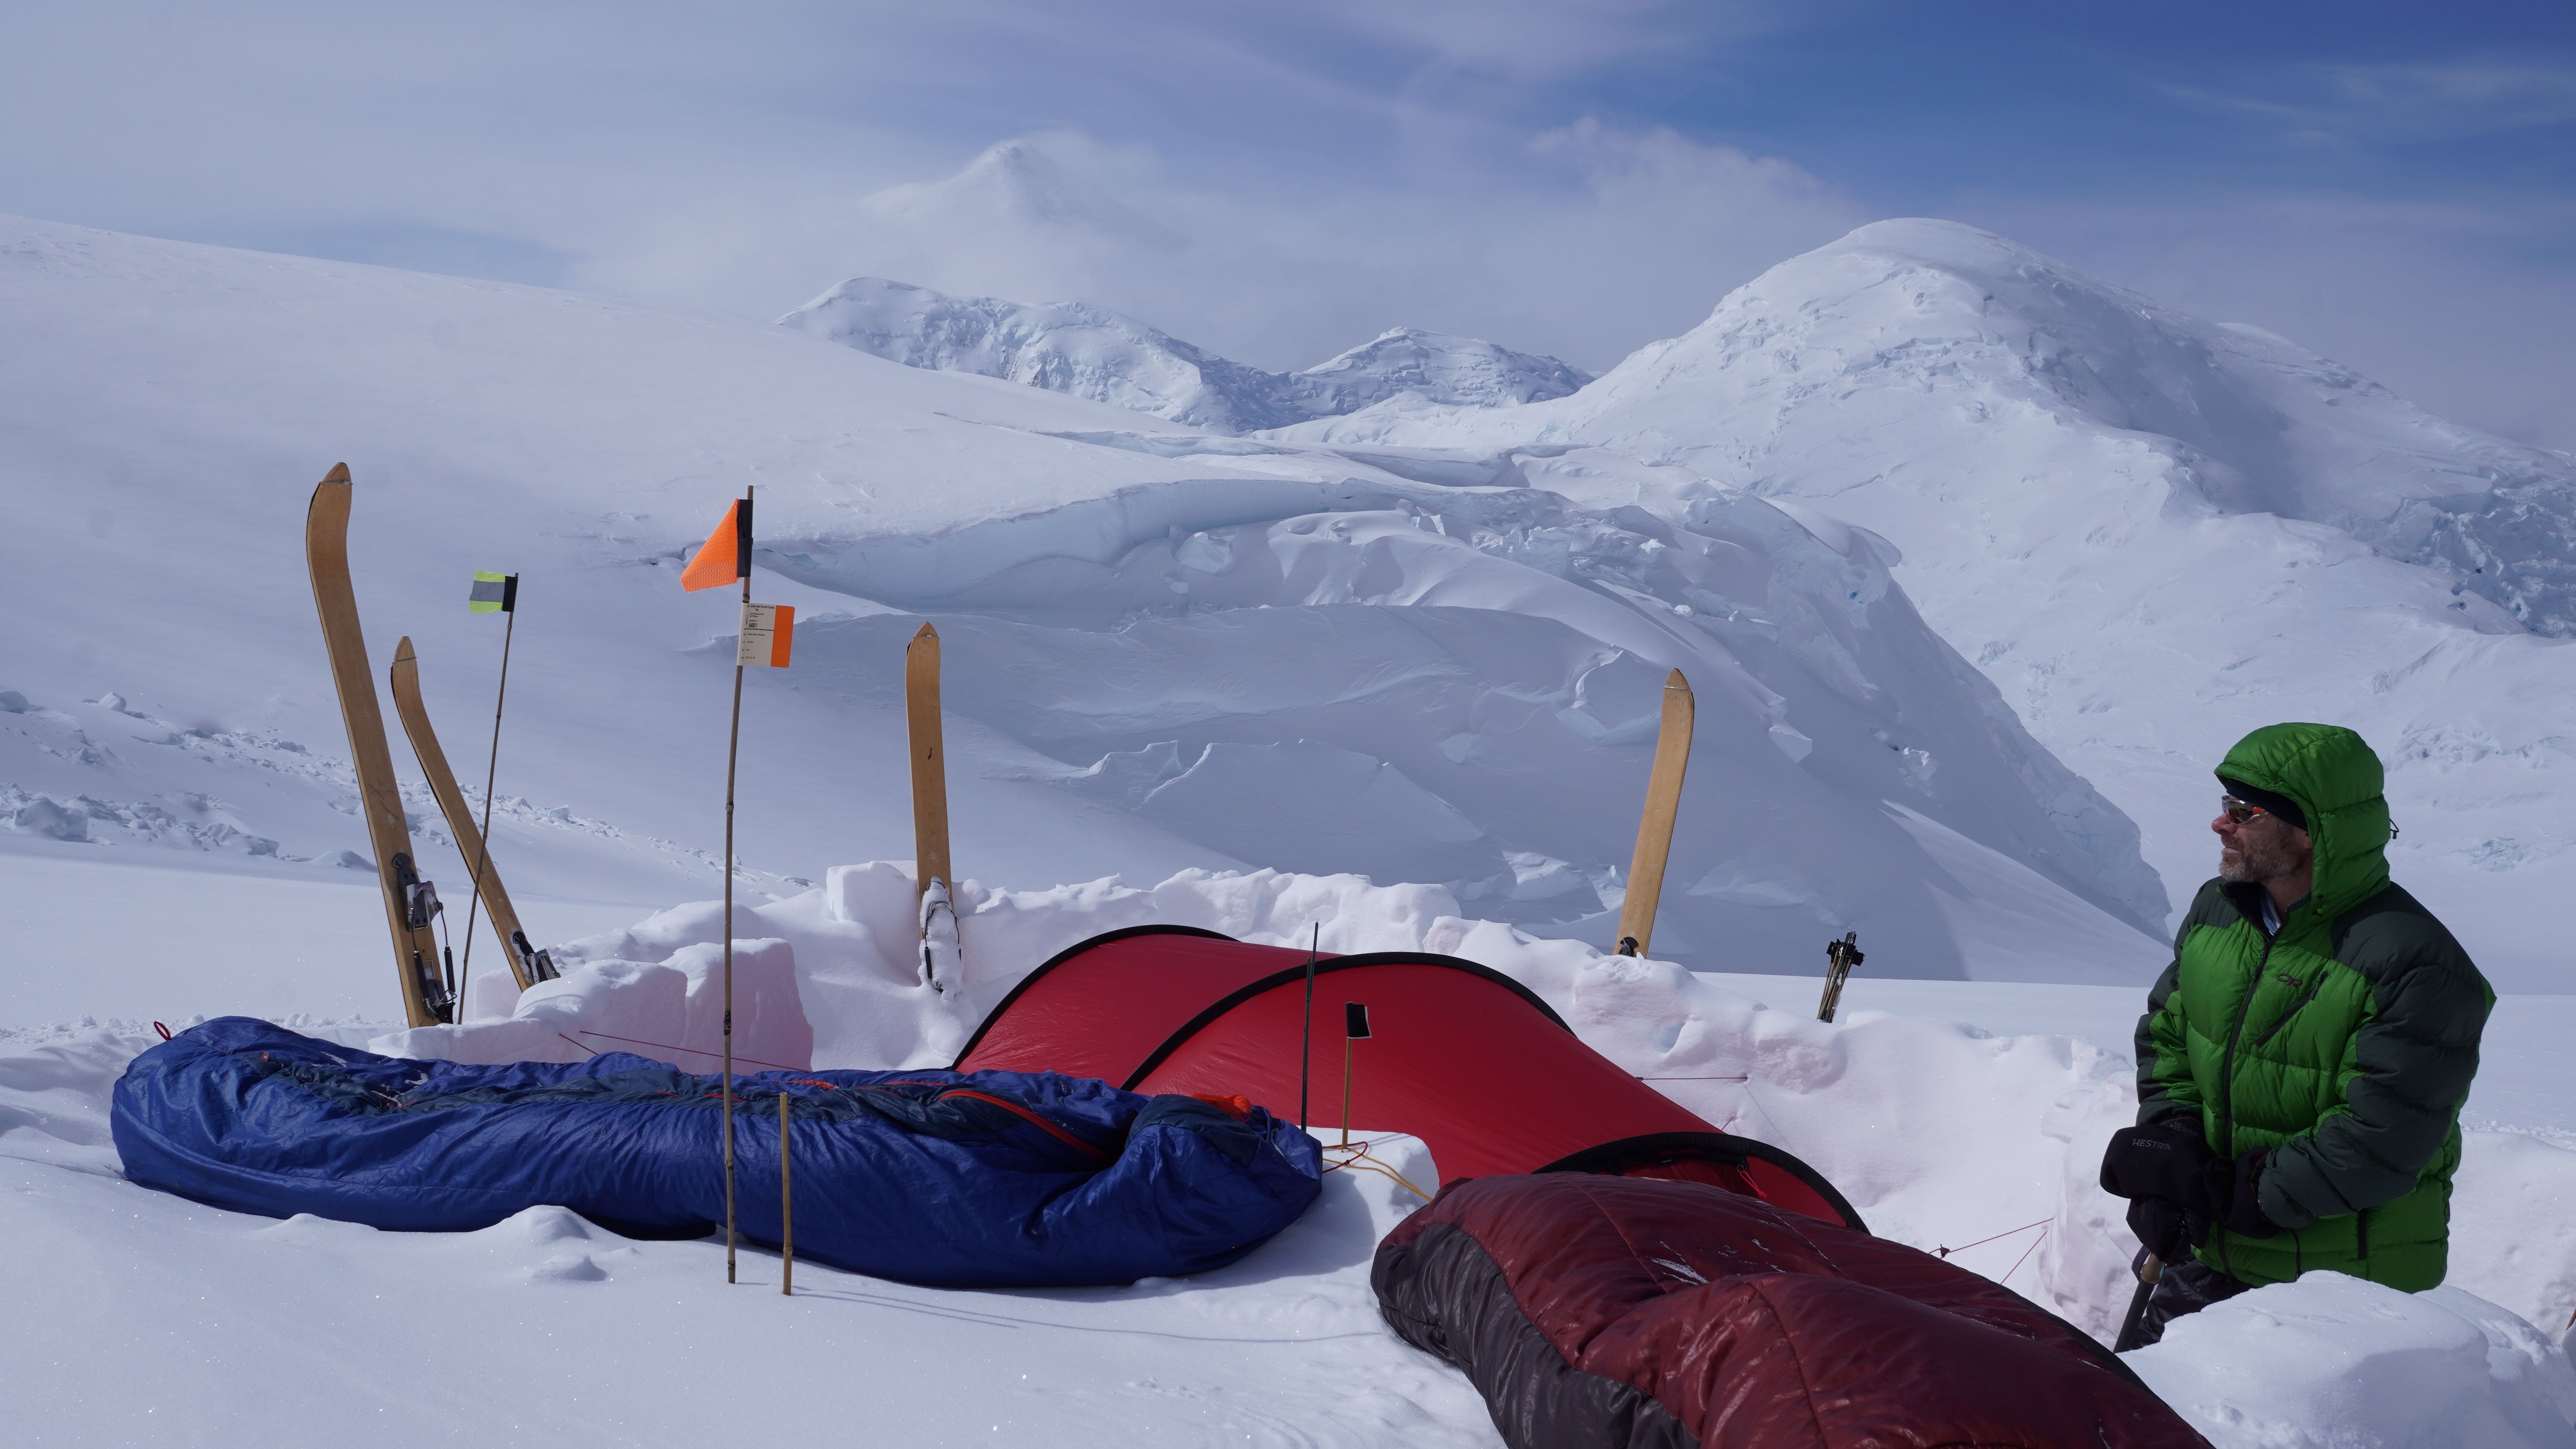 A man in a green puffy coat looks off at the snow capped peaks from his tent encampment